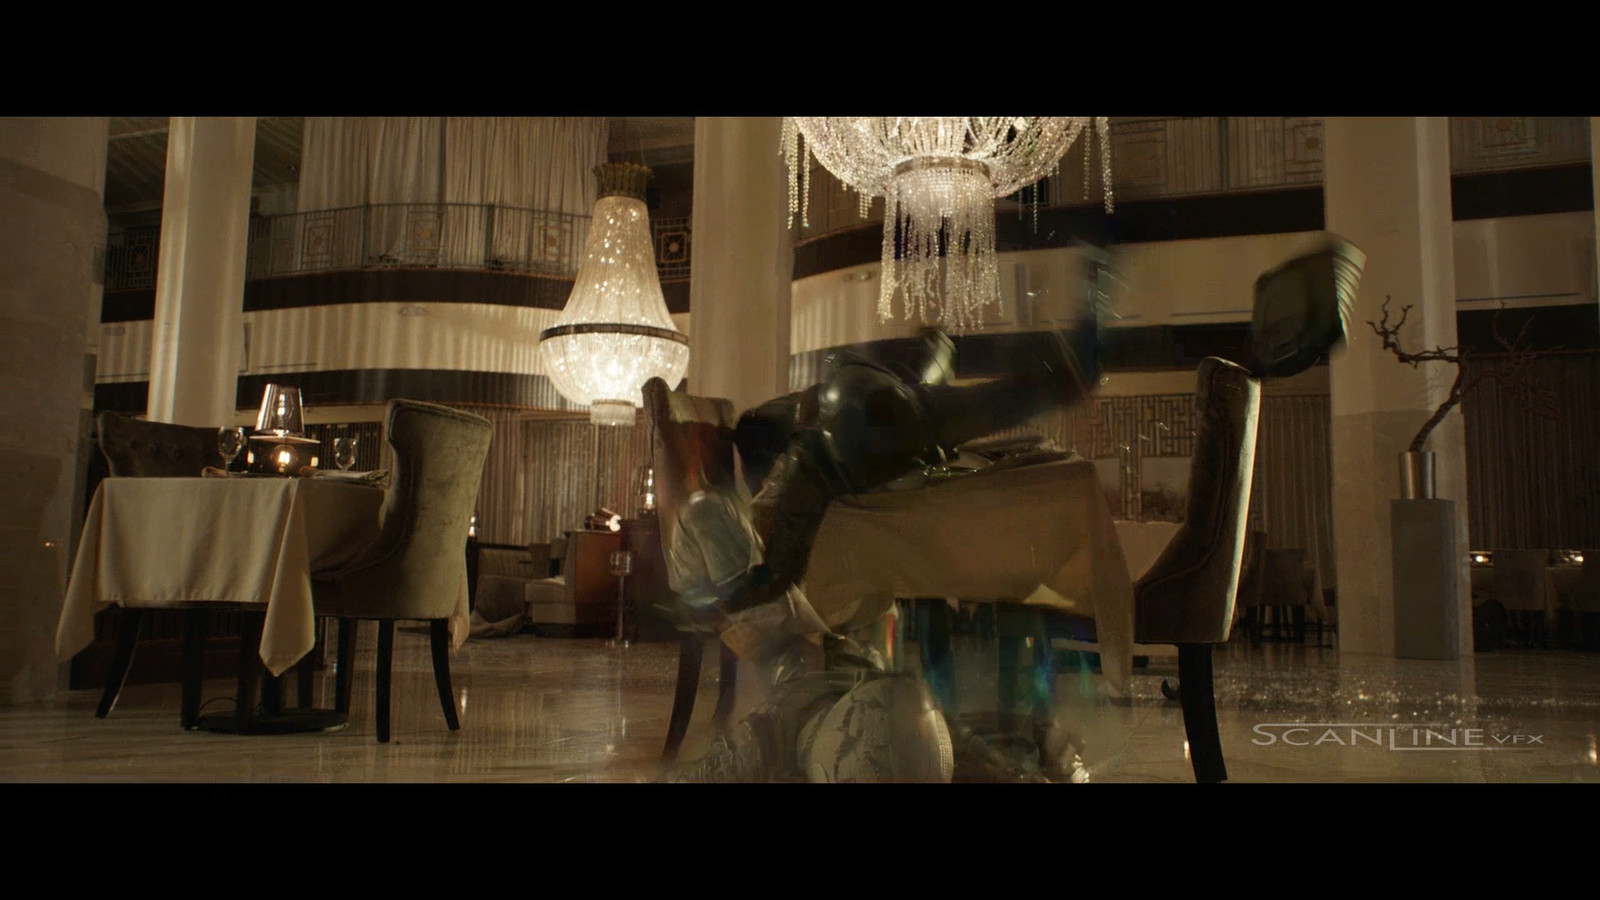 Compositing and integration work I have done in 2018 at Scanline VFX, as a Lead Compositor. Featuring: Ant-man and The Wasp.

Full CG Ghost and Wasp Body Parts + CG Chandelier + Plate Integration and enhancements.